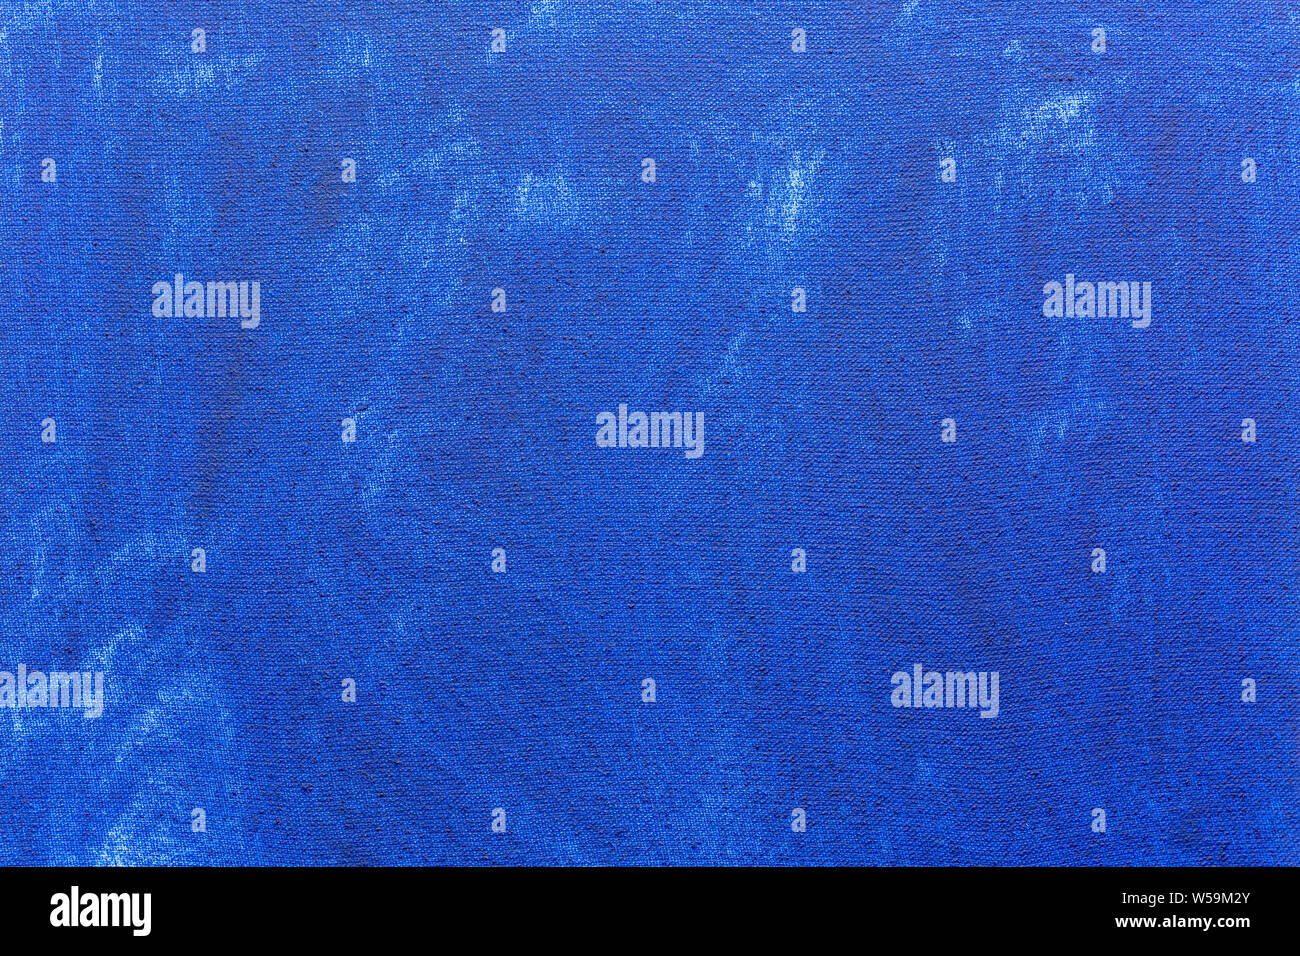 Abstract grunge painted background. Background was painted with blue egg tempera on canvas by hand. Stock Photo